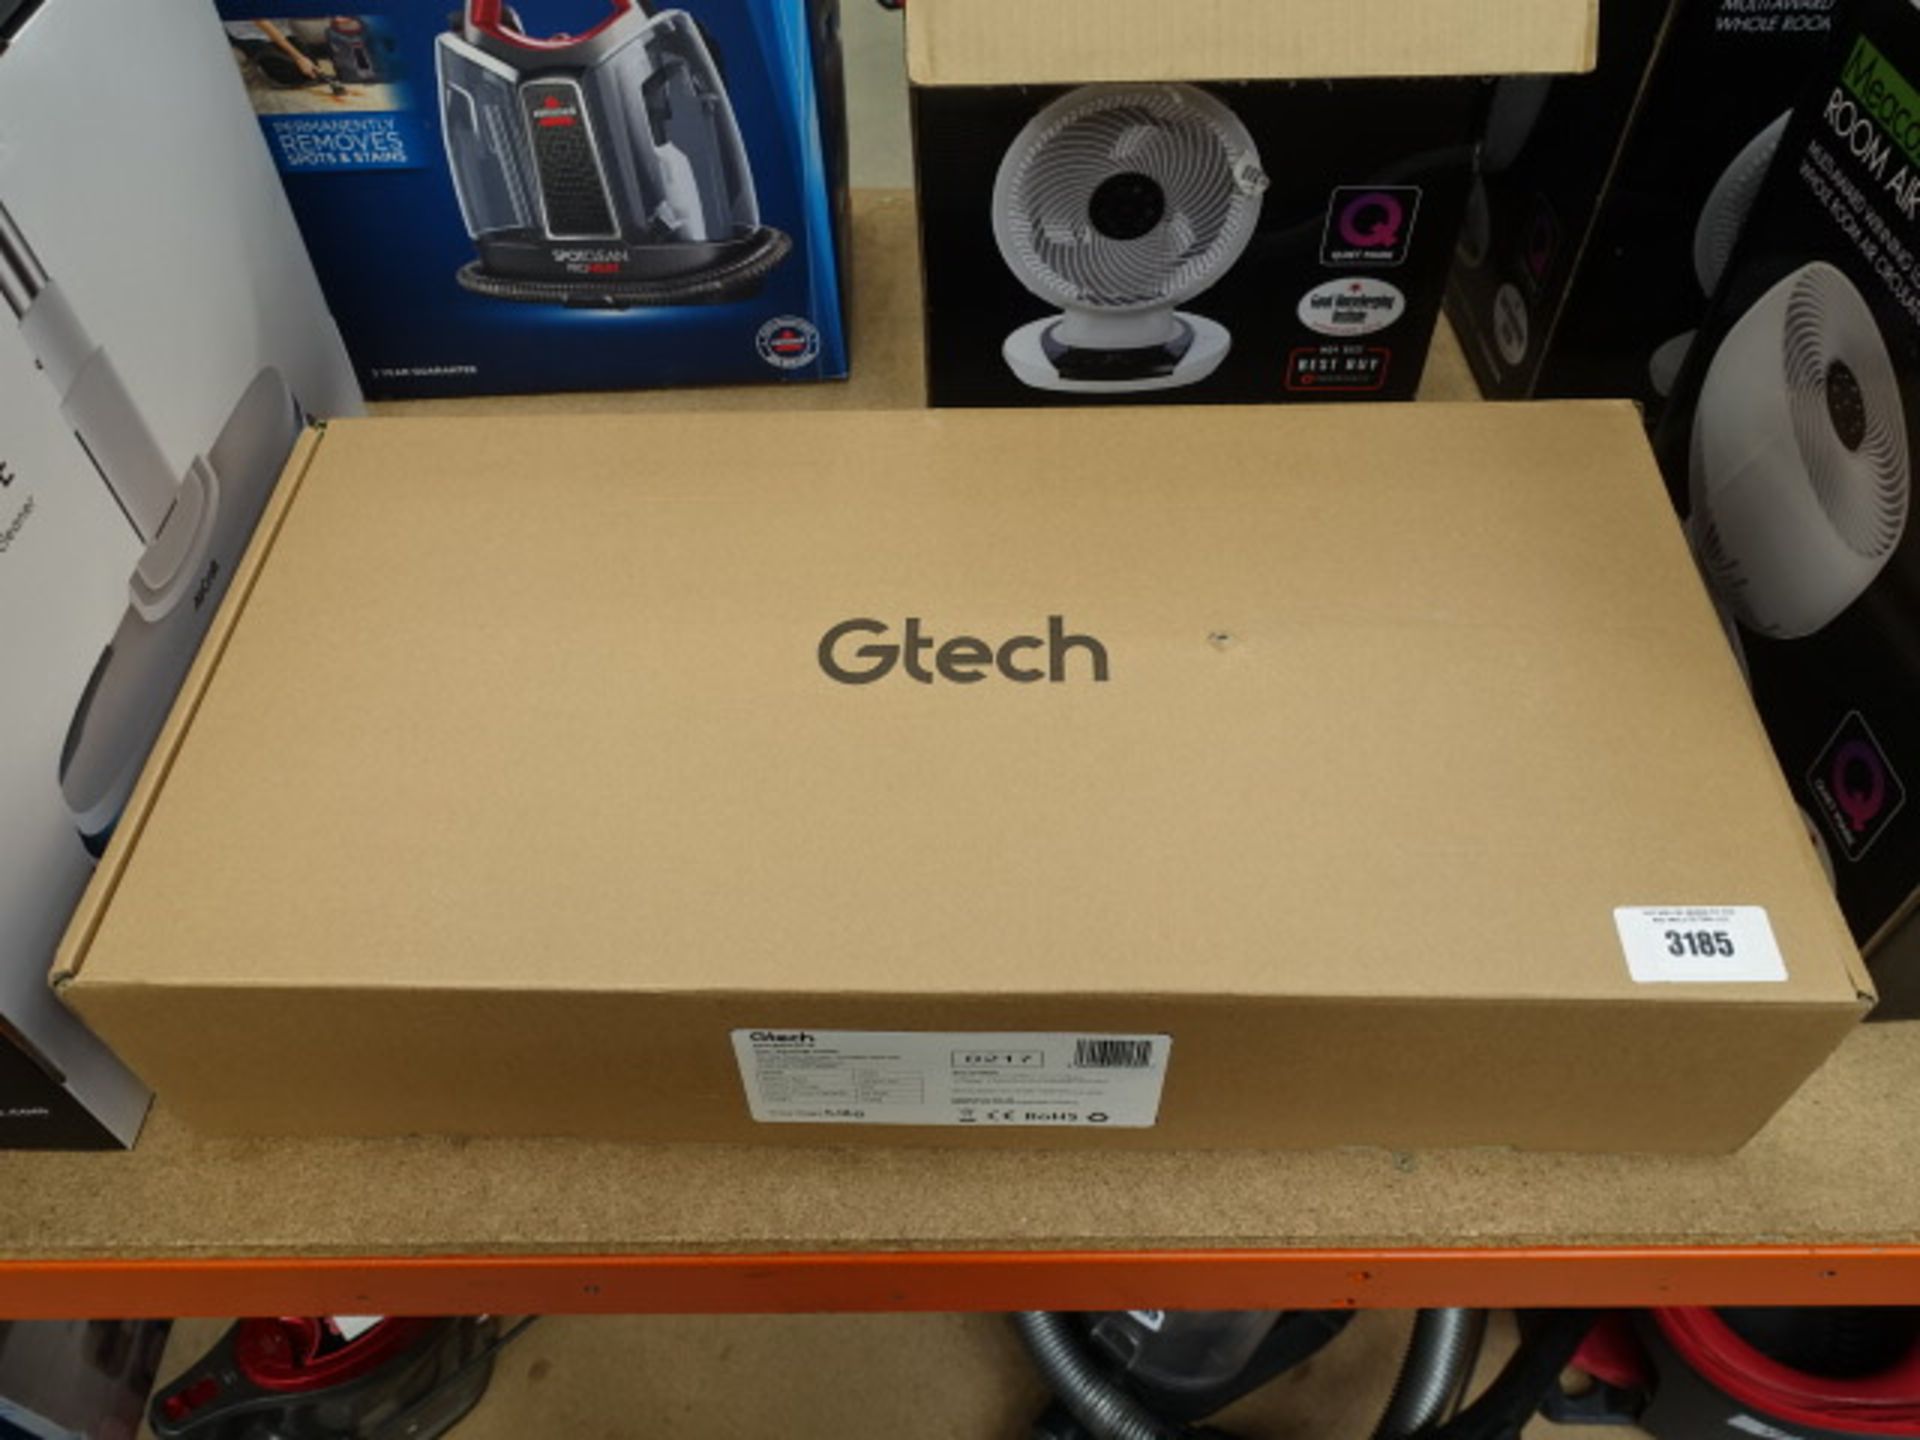 Boxed upright GTech AirRam with charger and manual